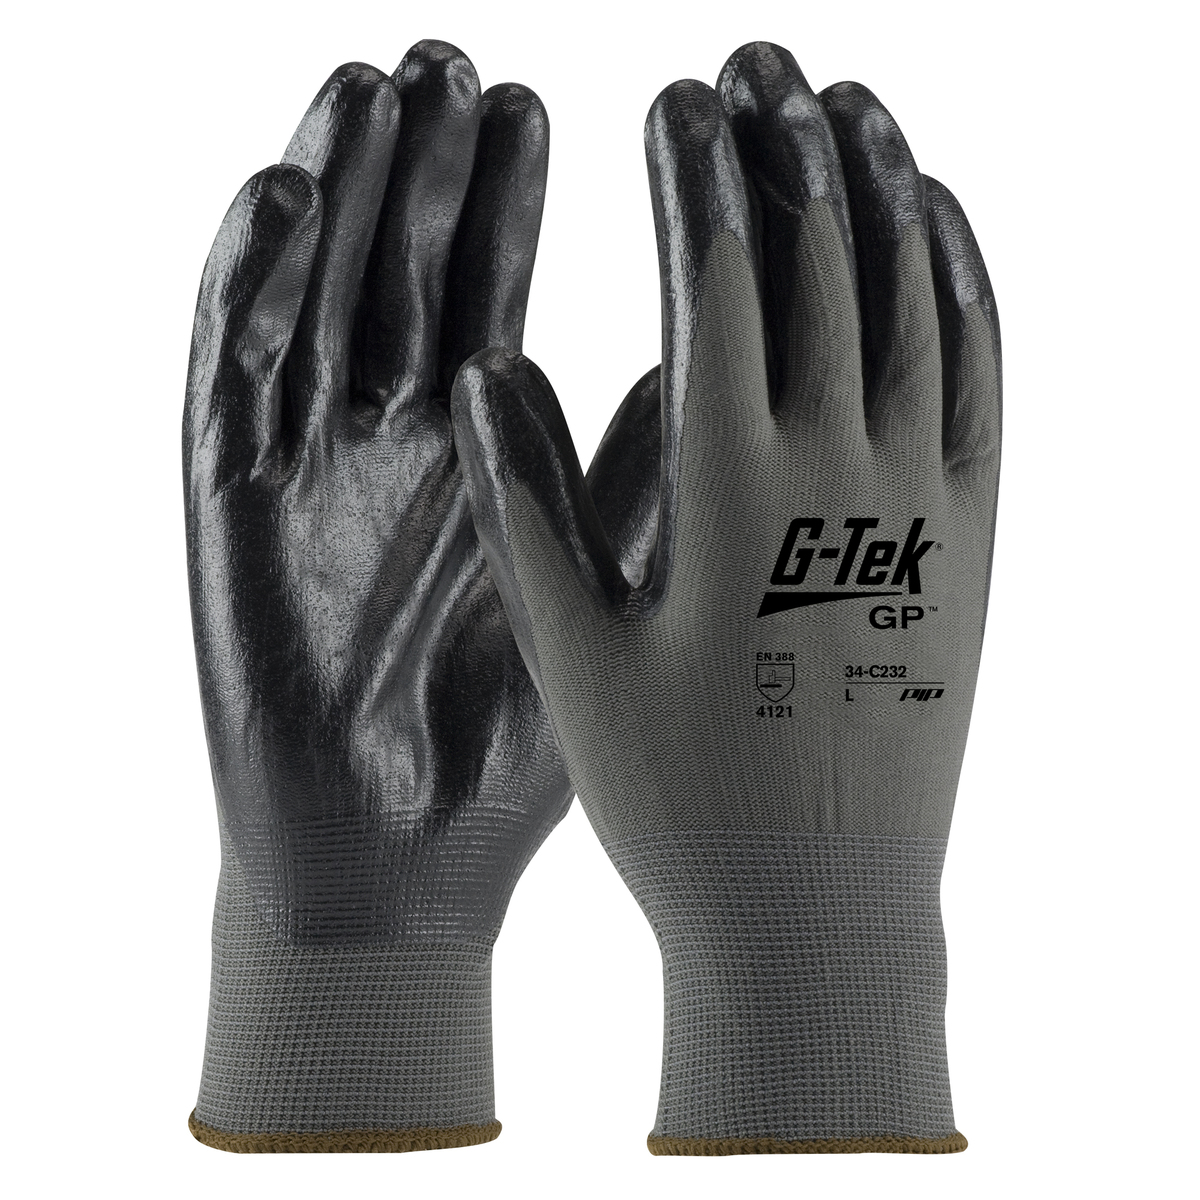 PIP® Large G-Tek® GP™ 13 Gauge Black Nitrile Palm And Finger Coated Work Gloves With Nylon Liner And Continuous Knit Wrist